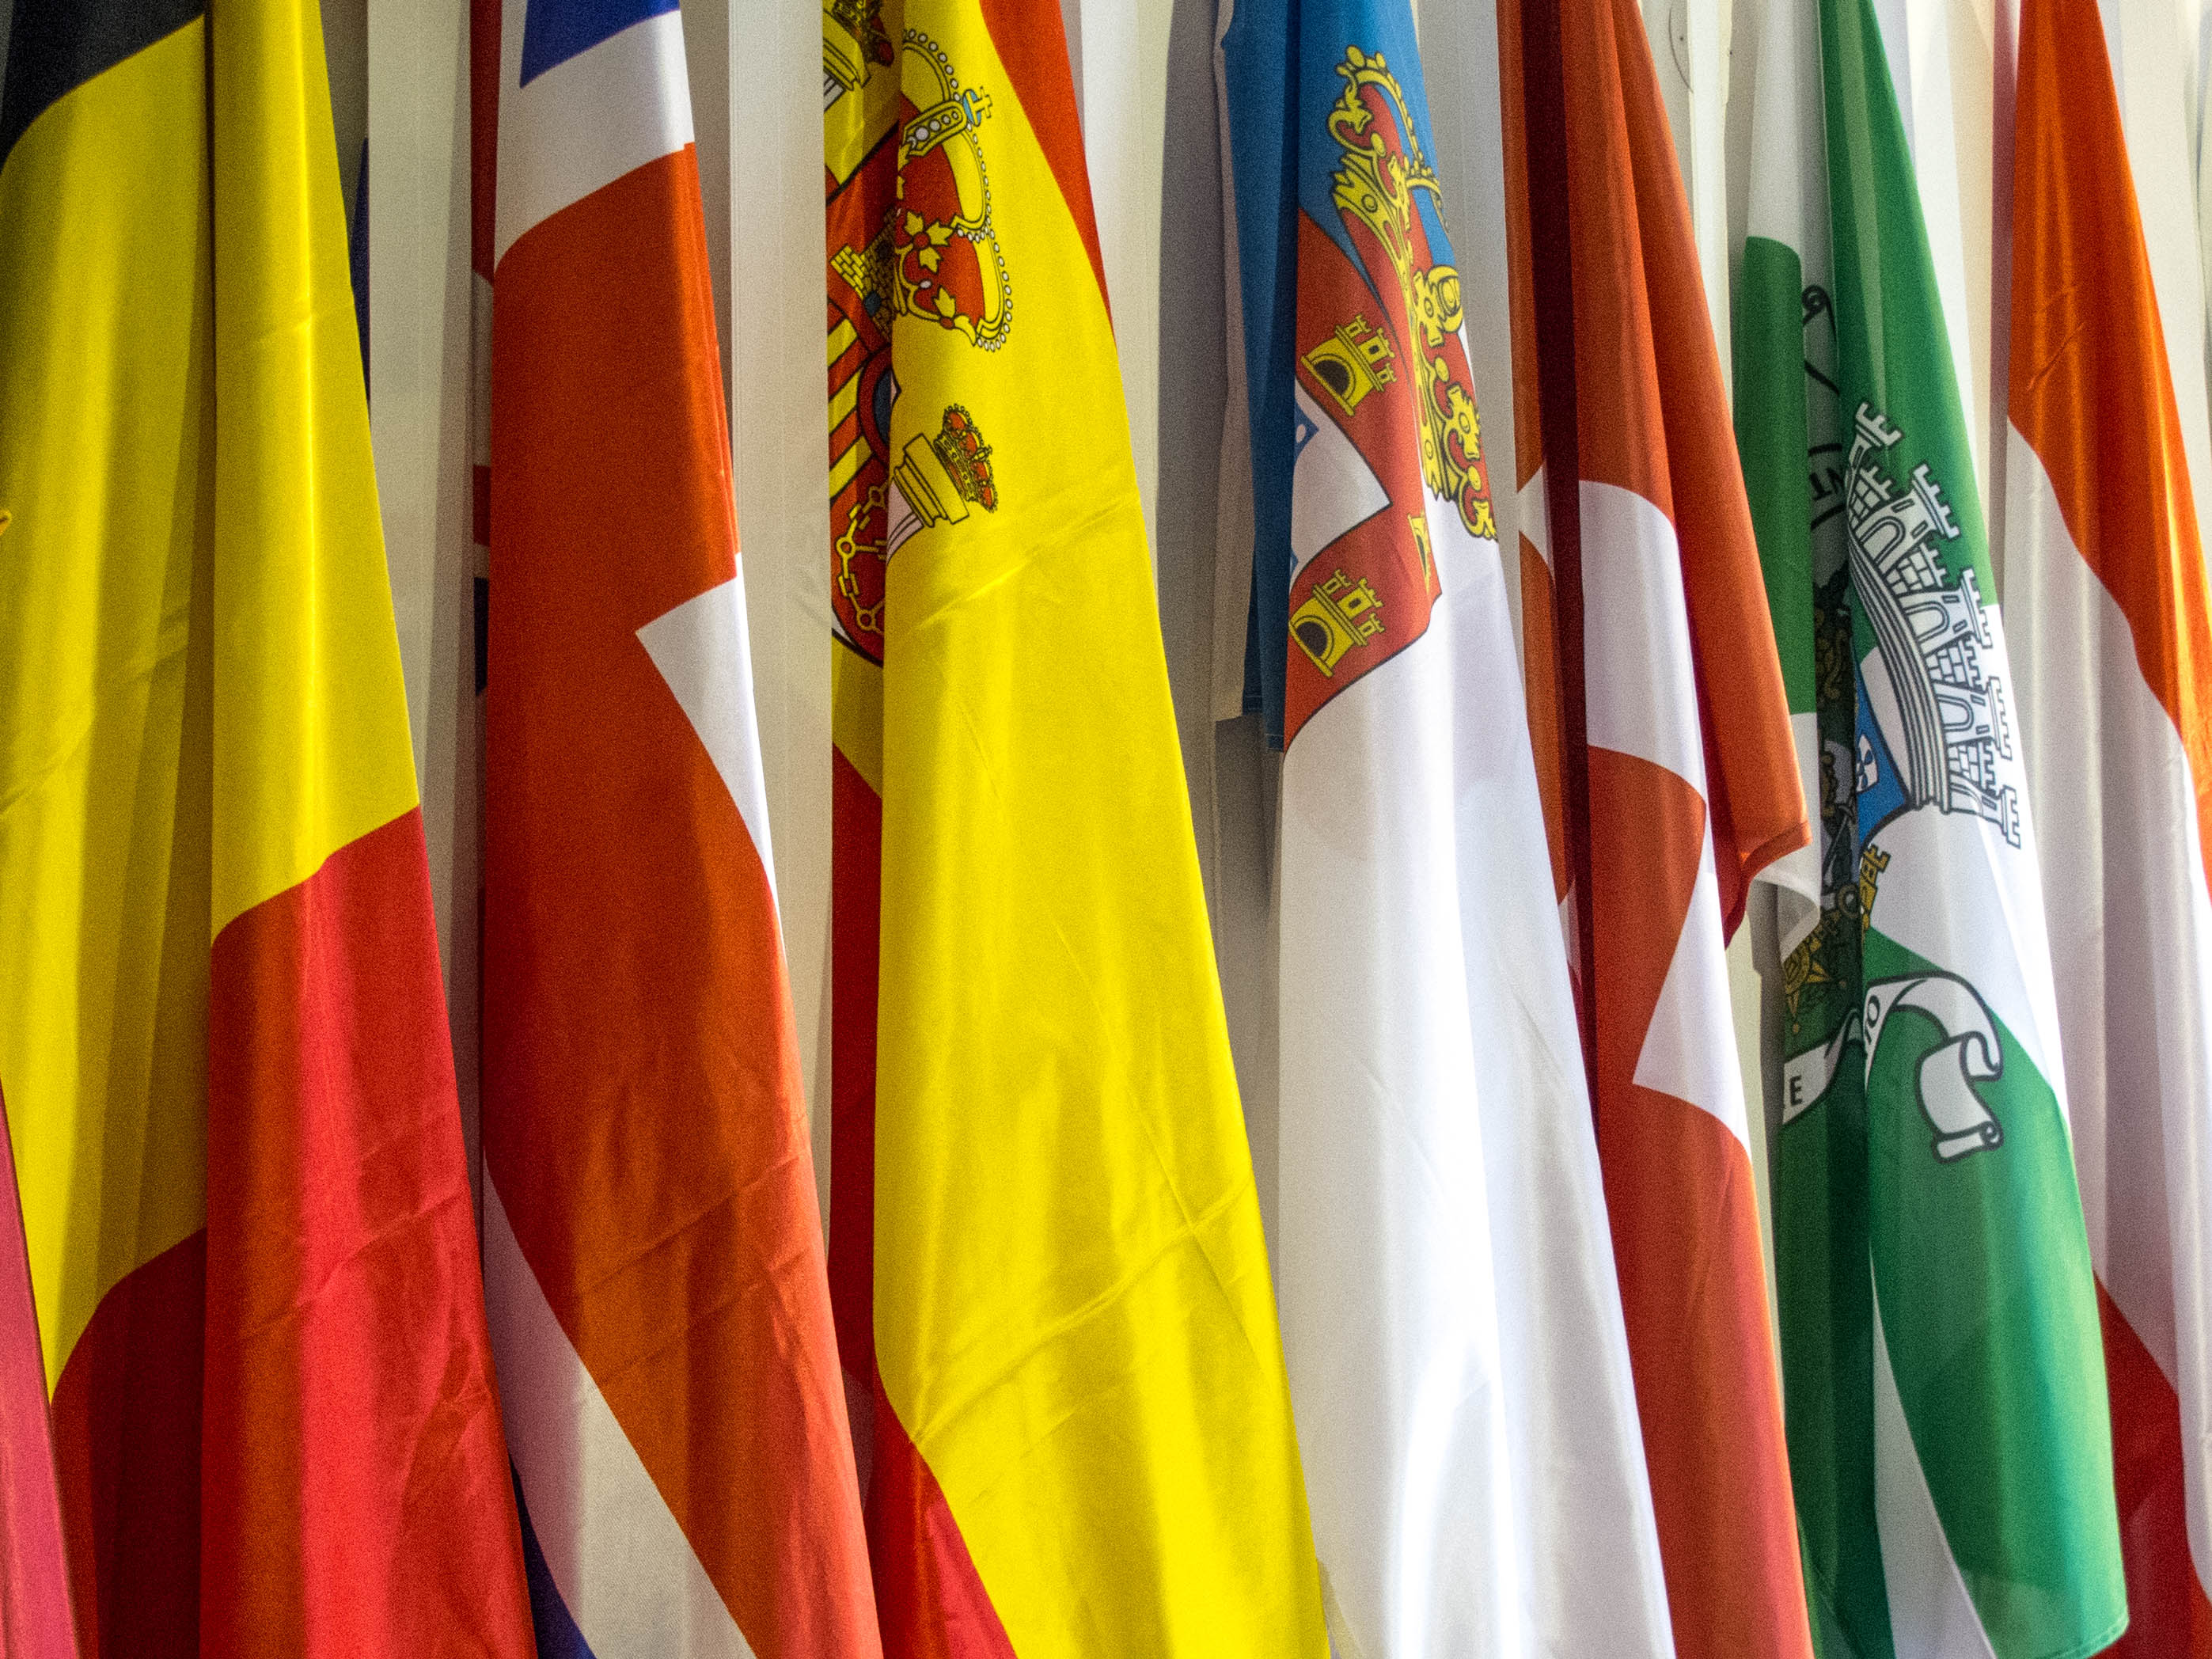 Flags from Belgium, United Kingdom, Spain, Portuguese Monarchy Switzerland and Porto